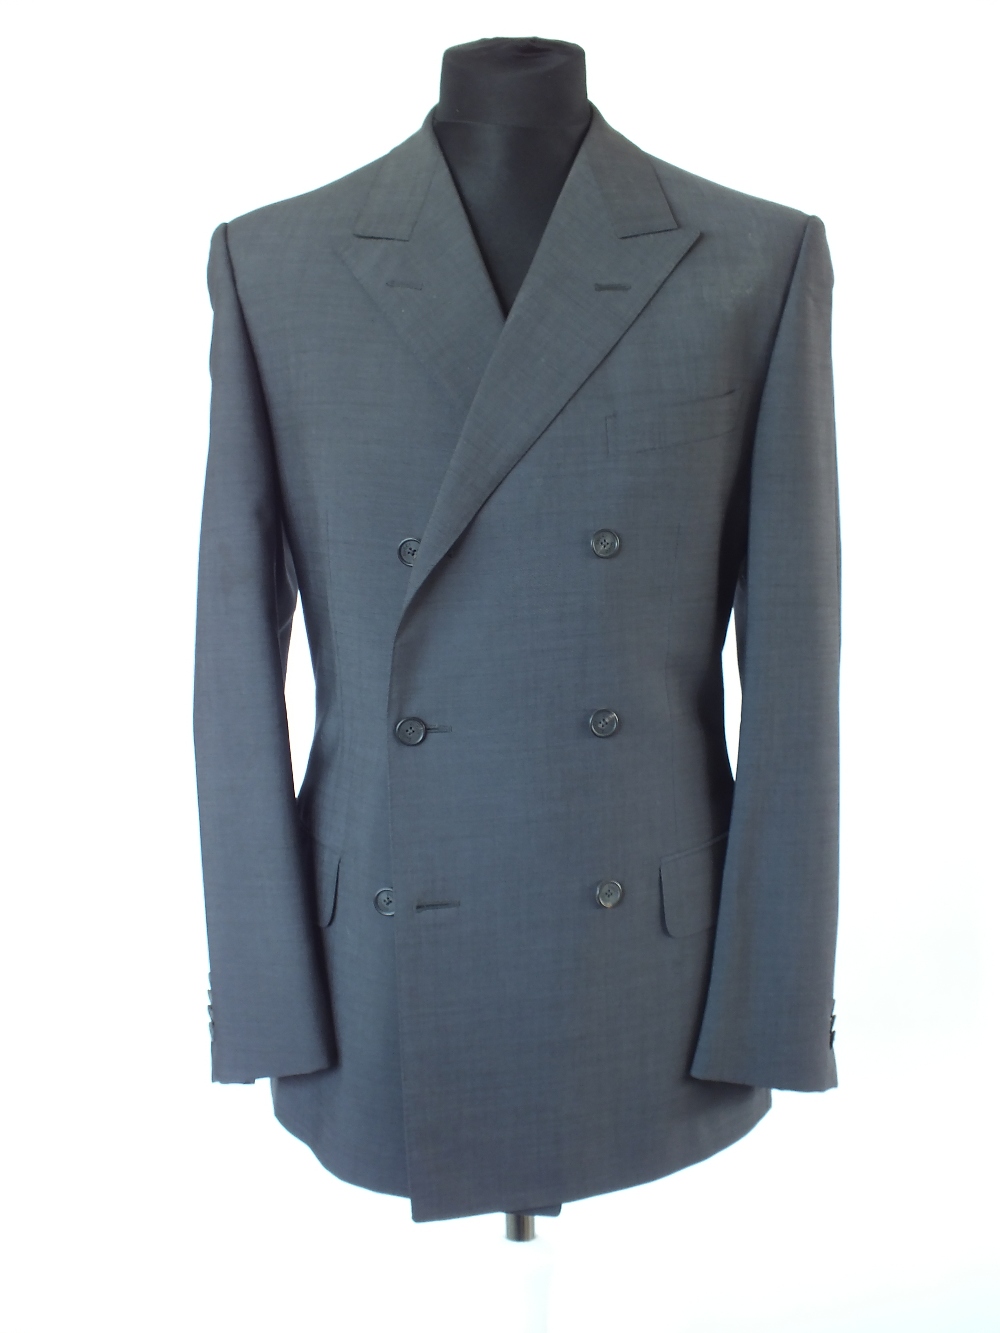 A Gucci suit, grey, double vent, Italian size 50R, 75% wool, 25% mohair, damage to left shoulder,